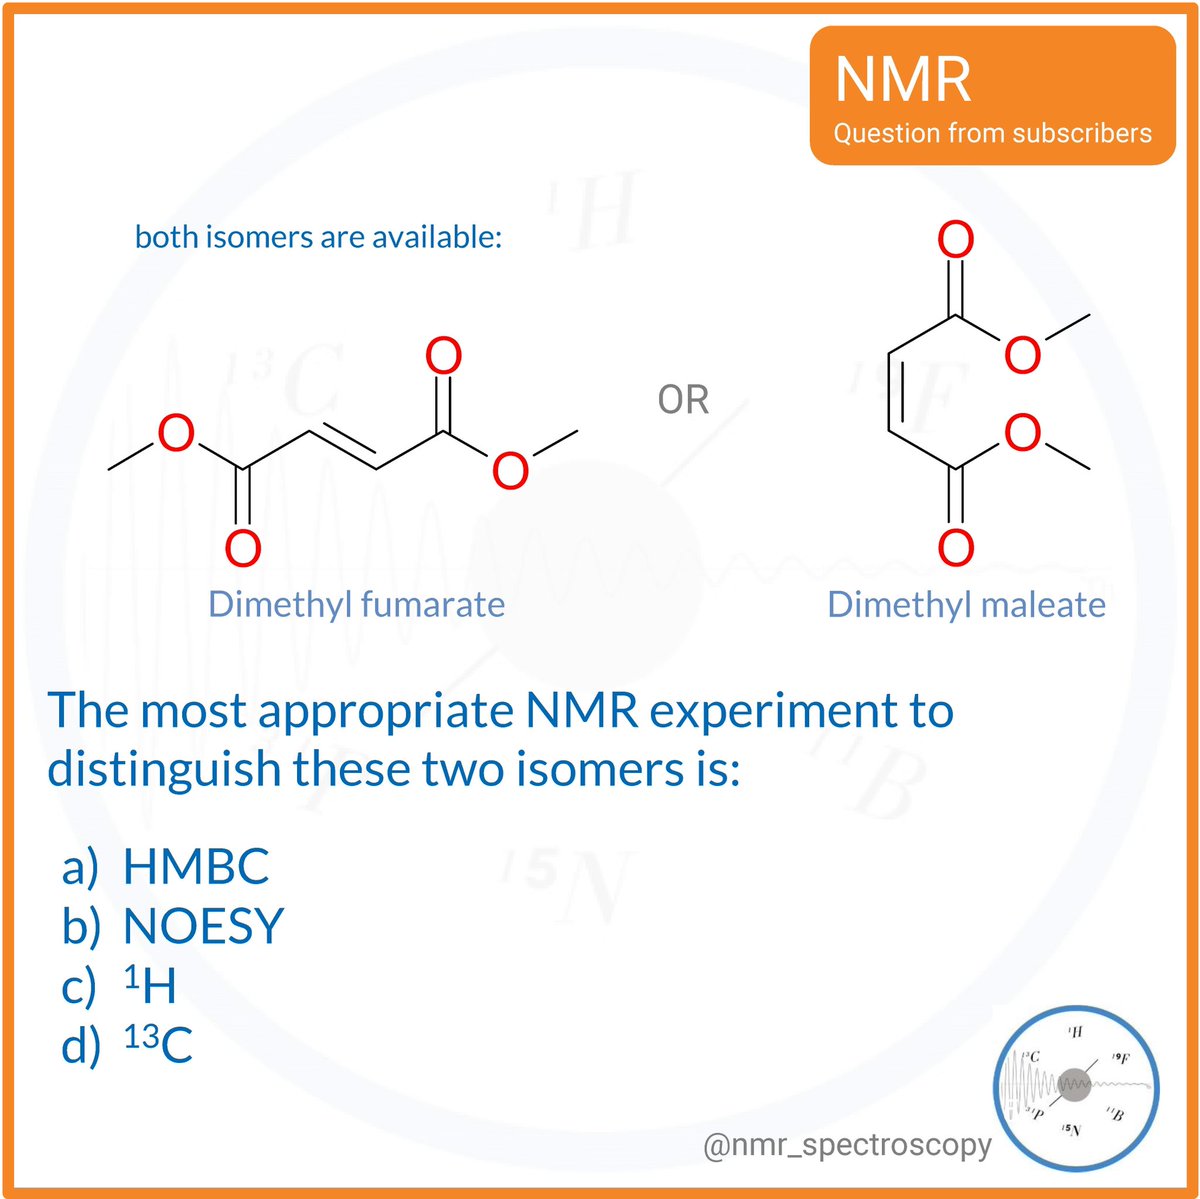 Easy question from our subscribers. There were several posts about structure elucidation of symmetrical molecules 📝 earlier. Check yourself 😉. #nmr #nmrchat #organichemistry #chemistry #synthesis #nuclearmagneticresonance #quimica #chemie